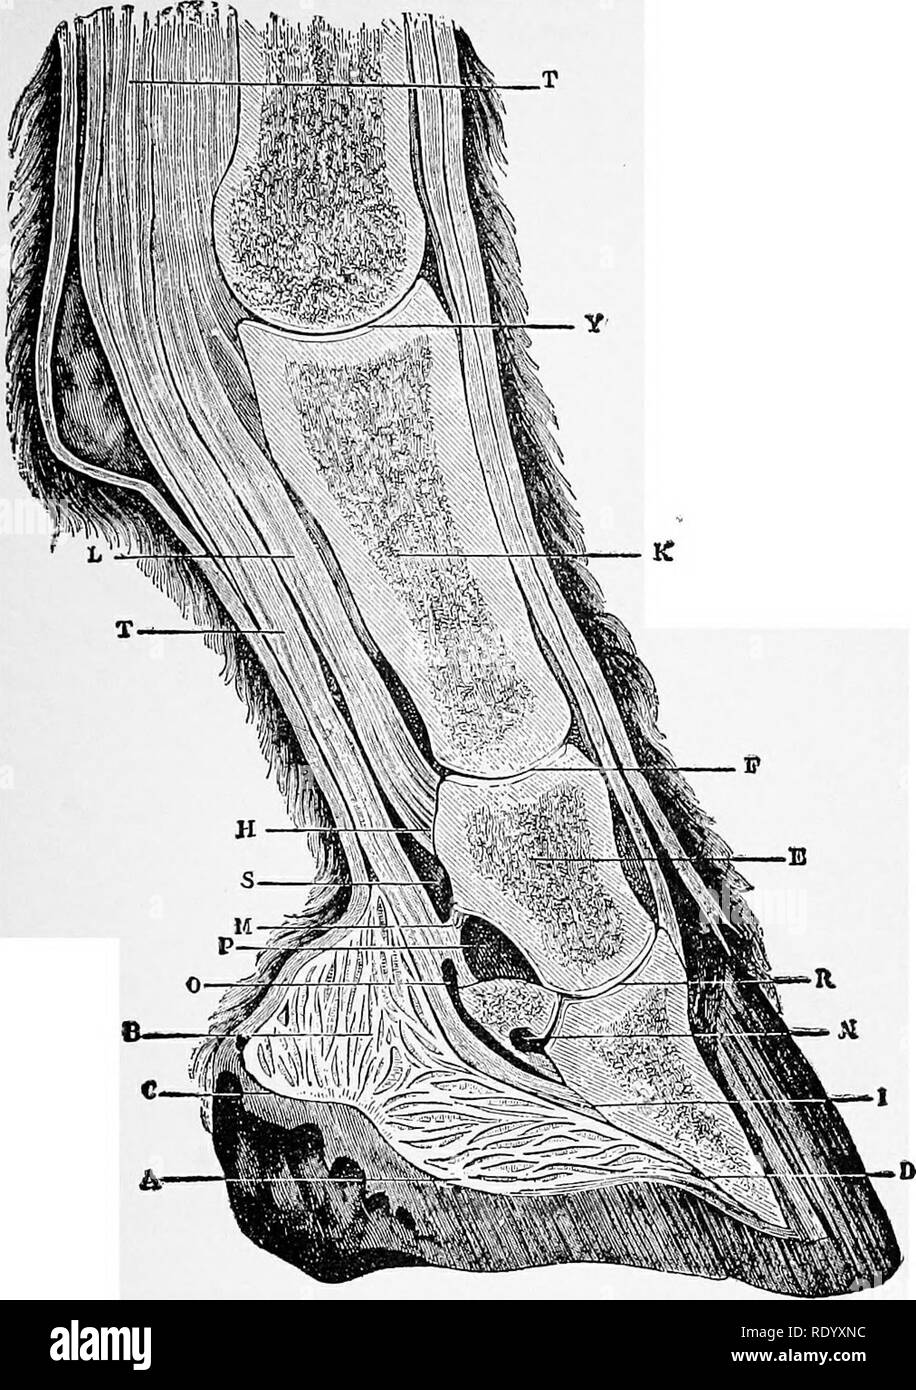 . Manual of operative veterinary surgery. Veterinary surgery. AUATOMY OF THE FOOT. 577. Fig. 478.—Longitudinal Section of tte Digital Eegion. A.—Lower part of the plantar cushion. B.—Ligamentous hands of the fibrous layers of the plantar cushion. C—Fibrous membrane of the plantar cushion. D.—In- sertion of the plantar cushion to the inferior face of the os pedis. E.—Spongy tissue of OS coronsB. F.—Articulation of first and second phalanx. H.—Perforatus tendon at- tached to the OS coronEB. I. —Insertion of plantar aponeurosis to the semi-lunar crest. K.—Spongy structure of 08'suffraginis. L.—Se Stock Photo